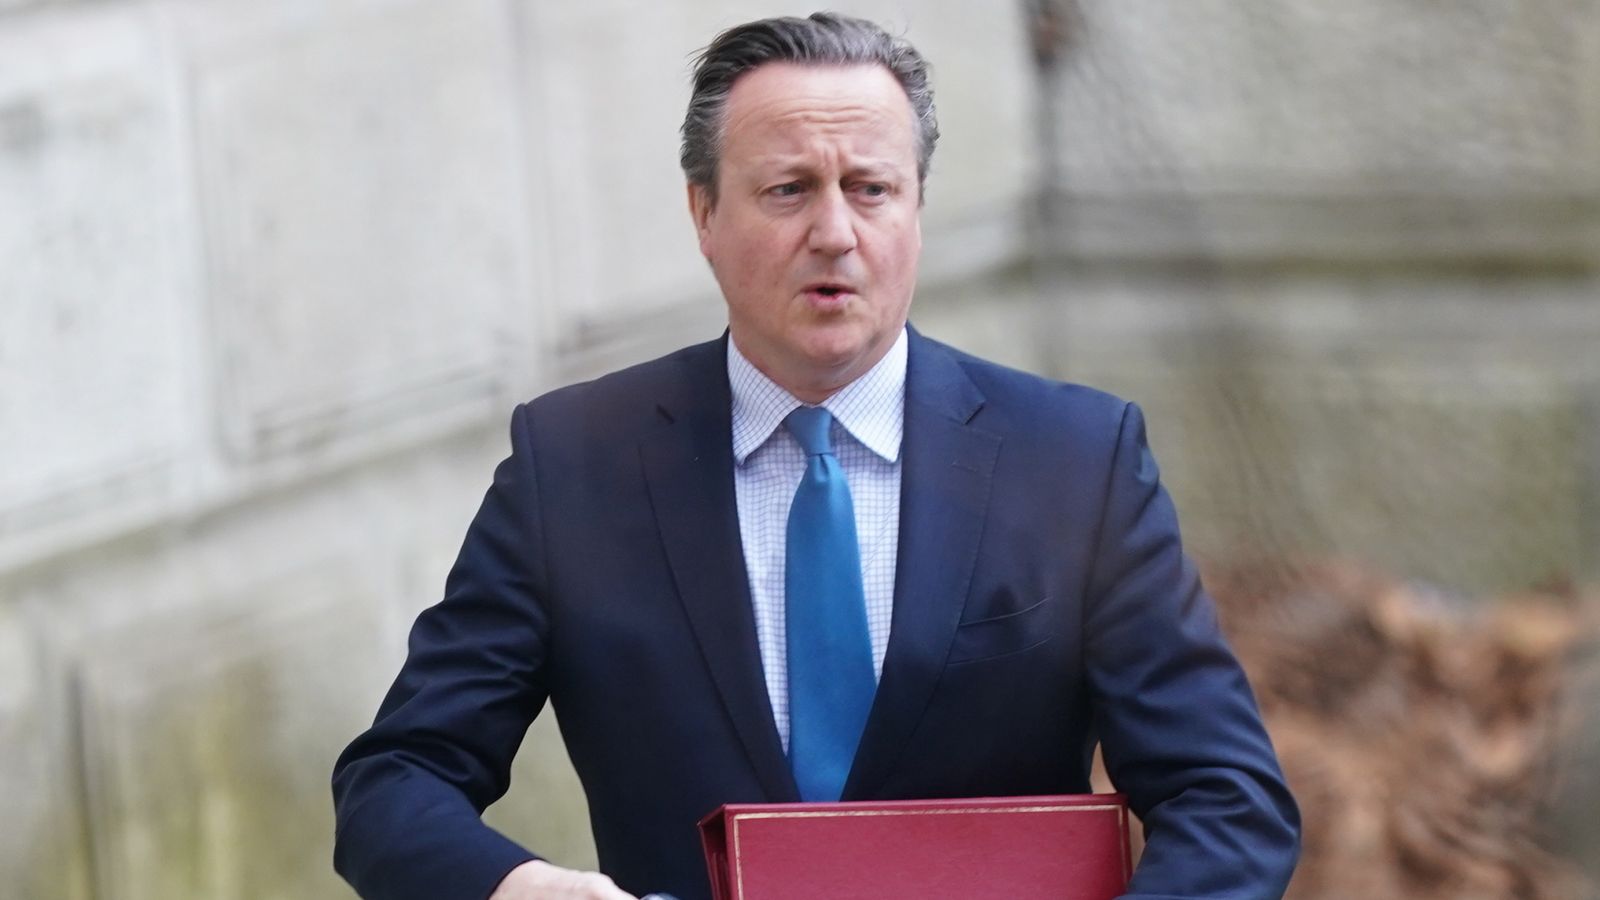 UK to warn Israel over Gaza aid as patience running 'thin', Lord Cameron says